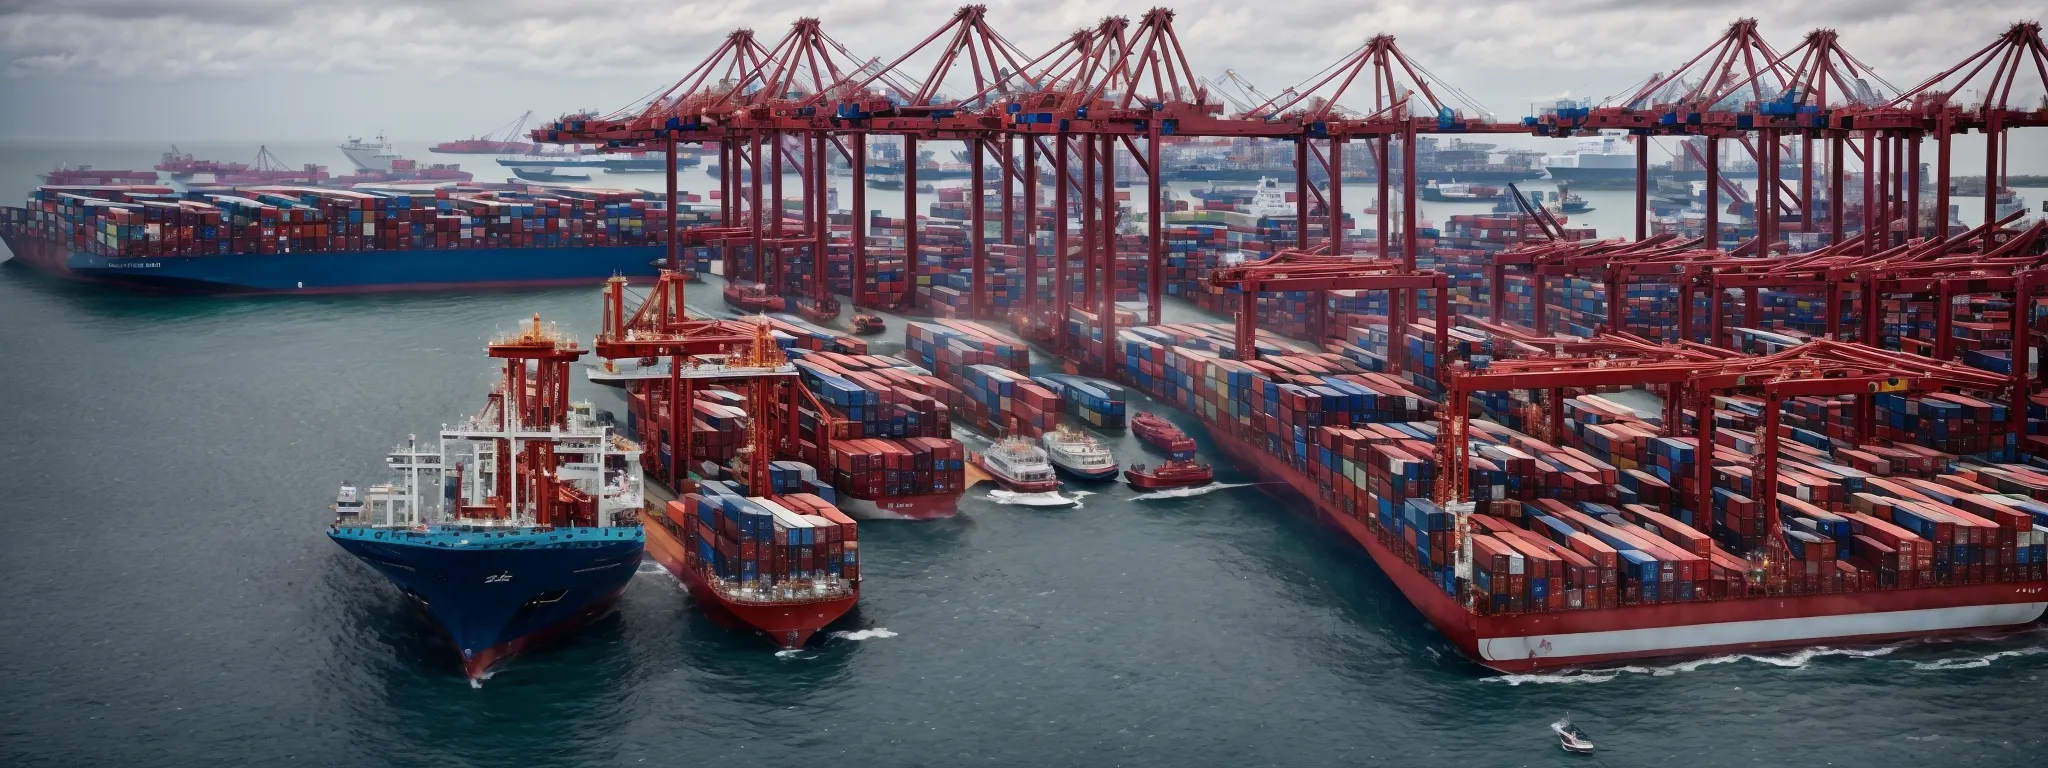 a bustling cargo port with rows of shipping containers and large cranes against a backdrop of the ocean.